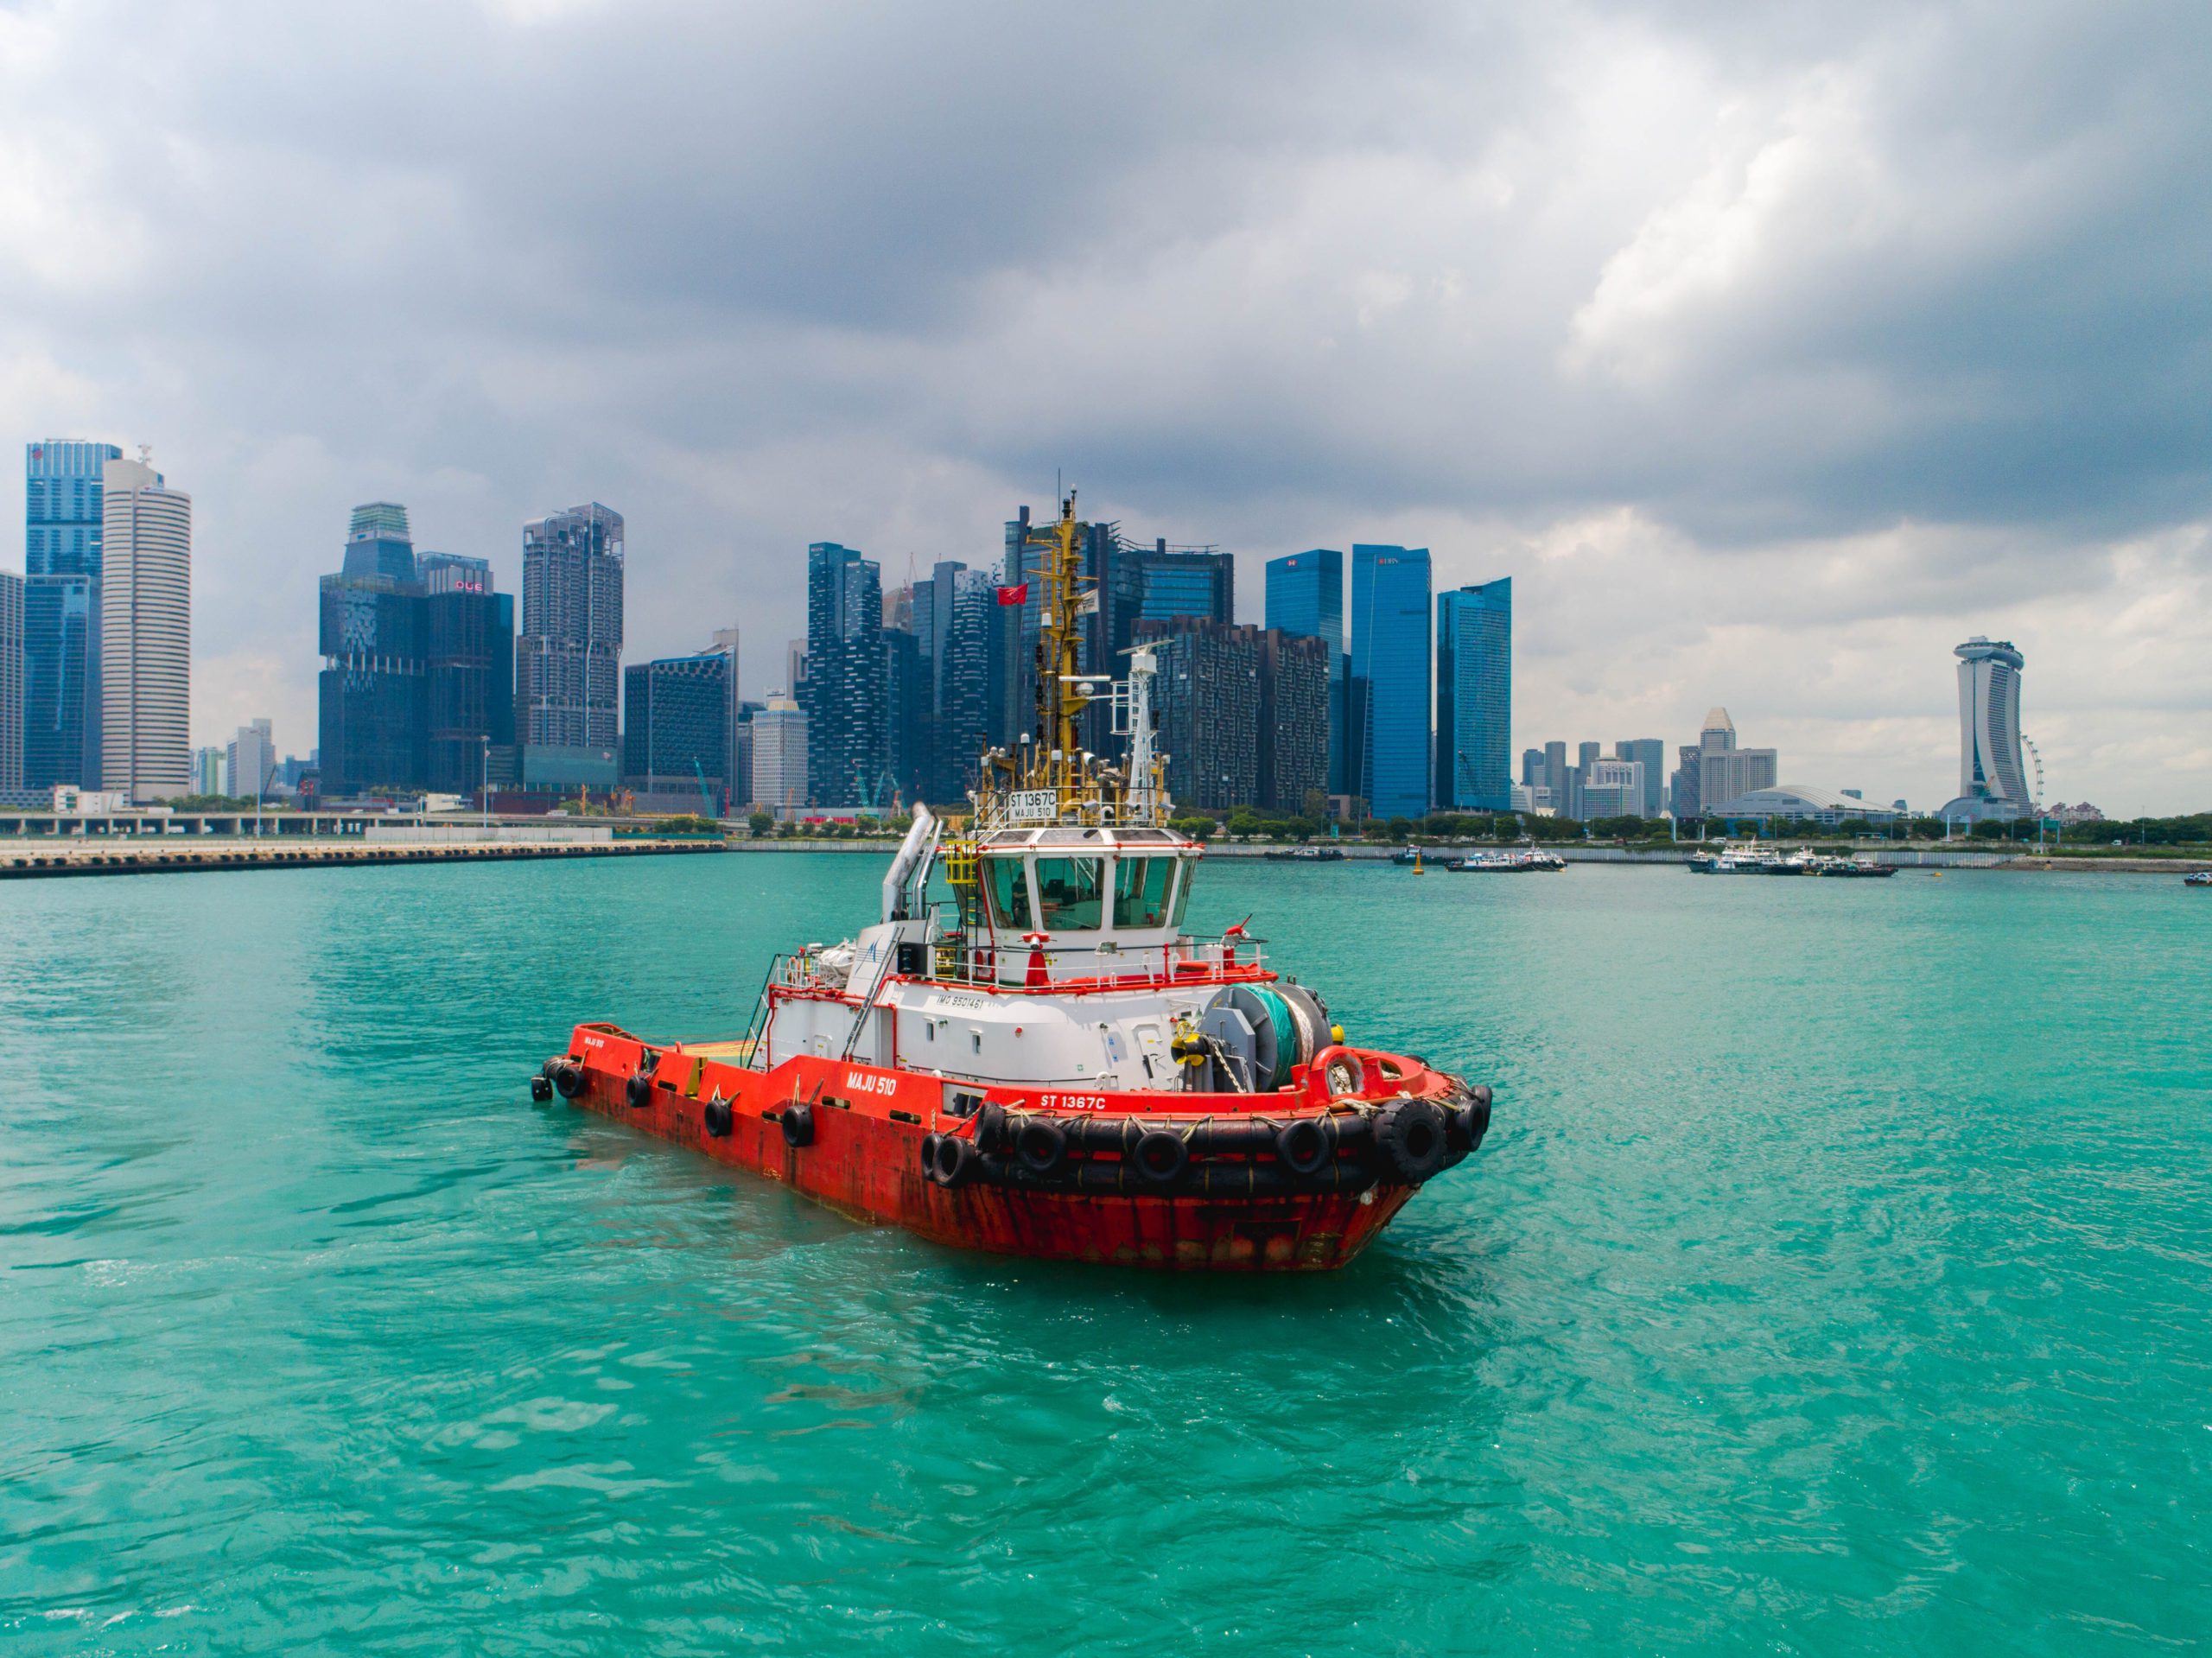 ABB and Keppel O&M reach key autonomy milestone with remote vessel operation trial in Port of Singapore